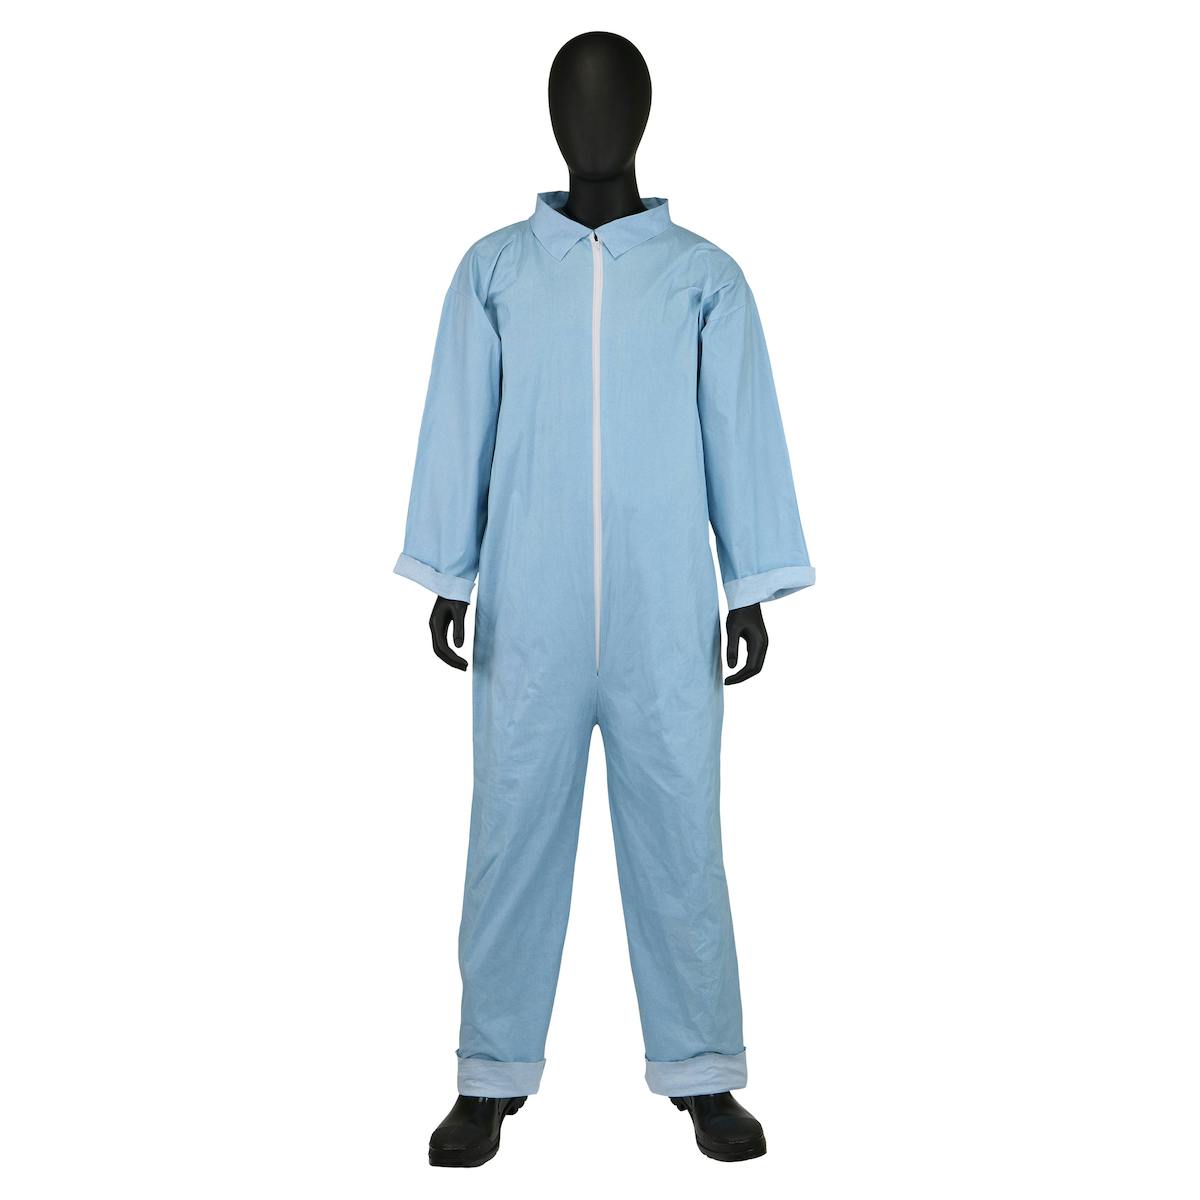 Posi-Wear Flame Resistant Basic Coverall, 80 gsm, Blue (3100)_0